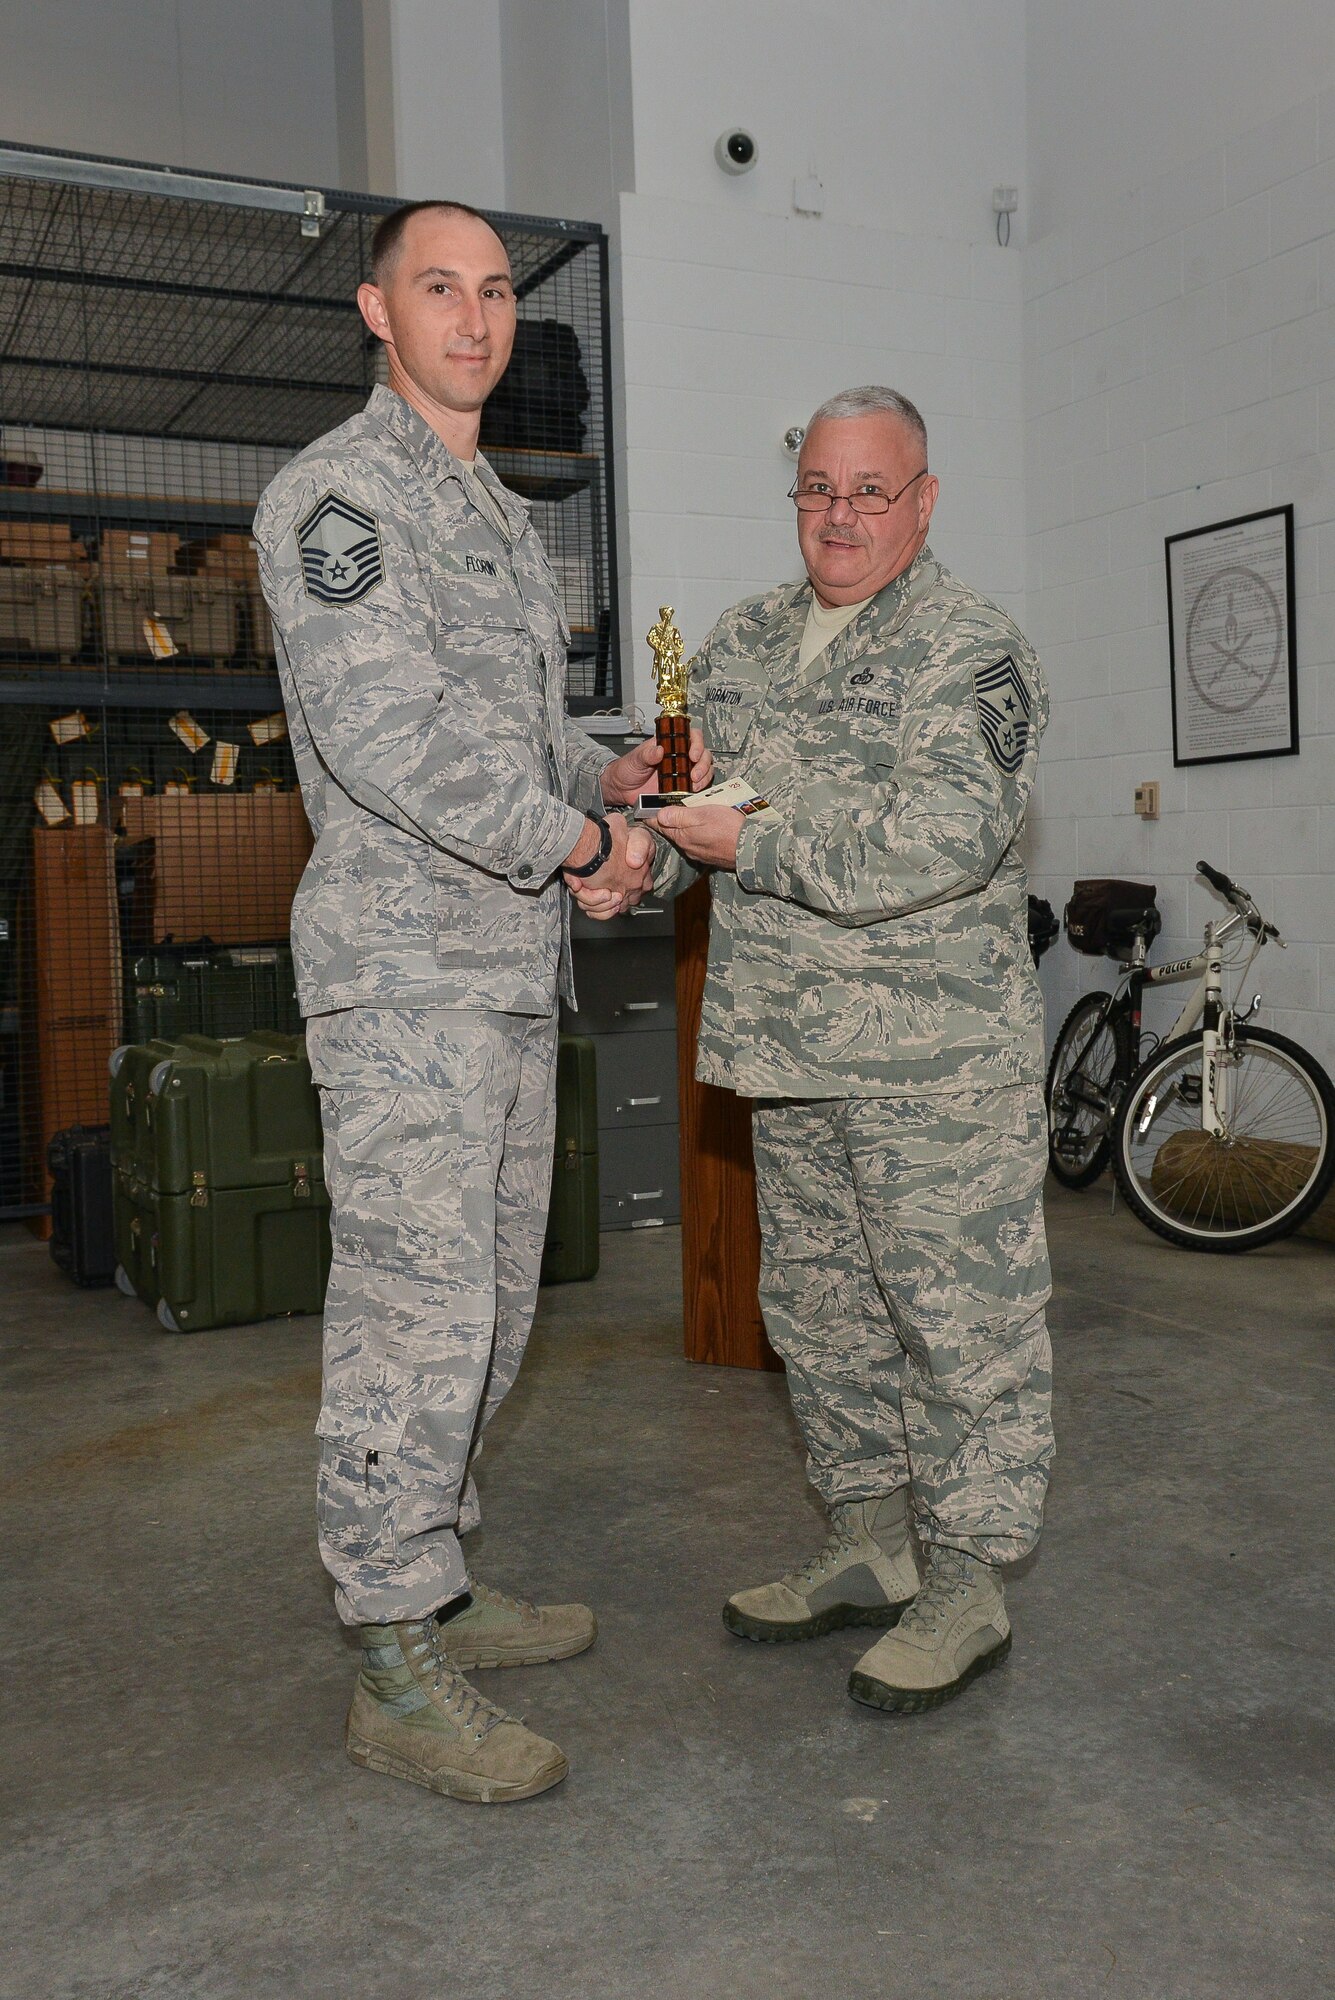 National Guard Senior Master Sgt.Daniel Florin accepts the trophy for Senior NCO of The Quarter, February 9, 2013 at Savannah Air National Guard Base in Garden City, Ga. Florin is part of the 165th Airlift Wing Security Forces Squadron. (National Guard photo by Tech. Sgt. Charles Delano/released)